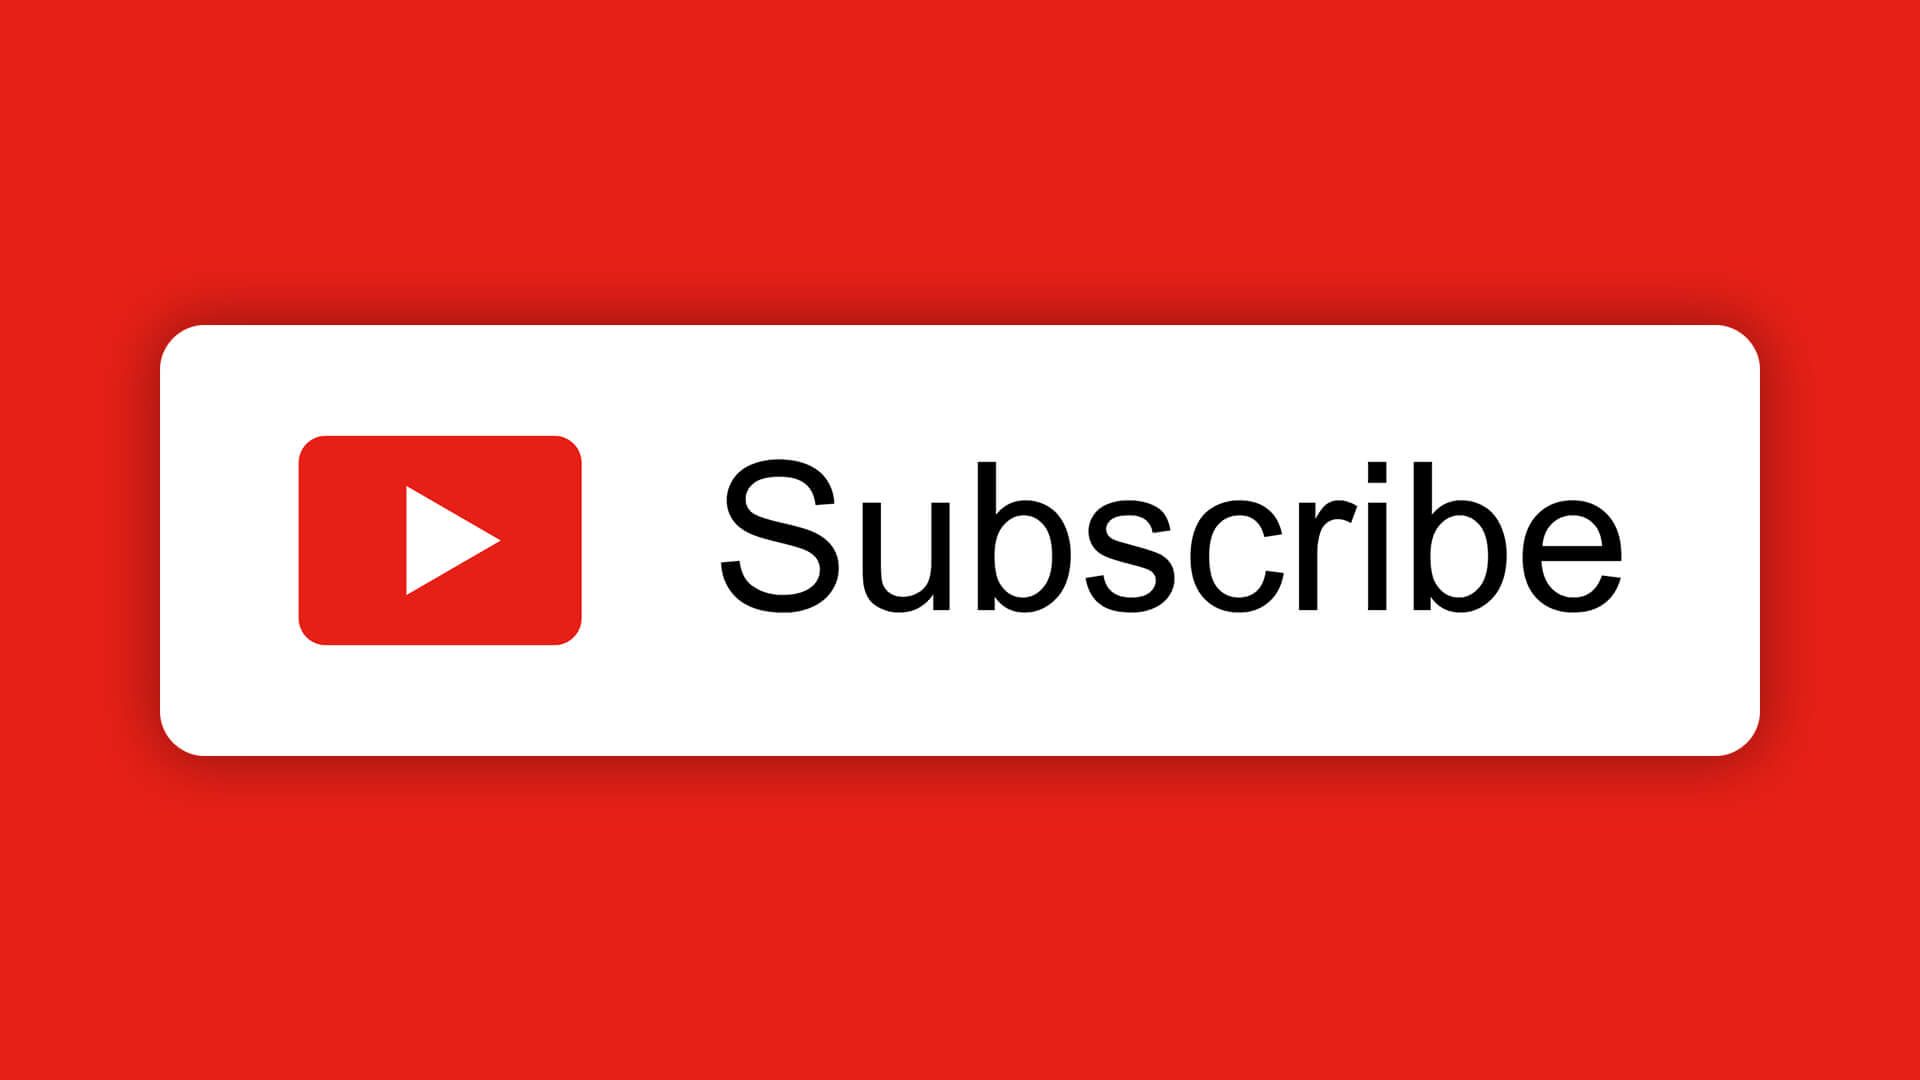 Free YouTube Subscribe Button Download Design Inspiration By AlfredoCreates 3. First Youtube Video Ideas, Youtube Channel Ideas, Youtube Editing